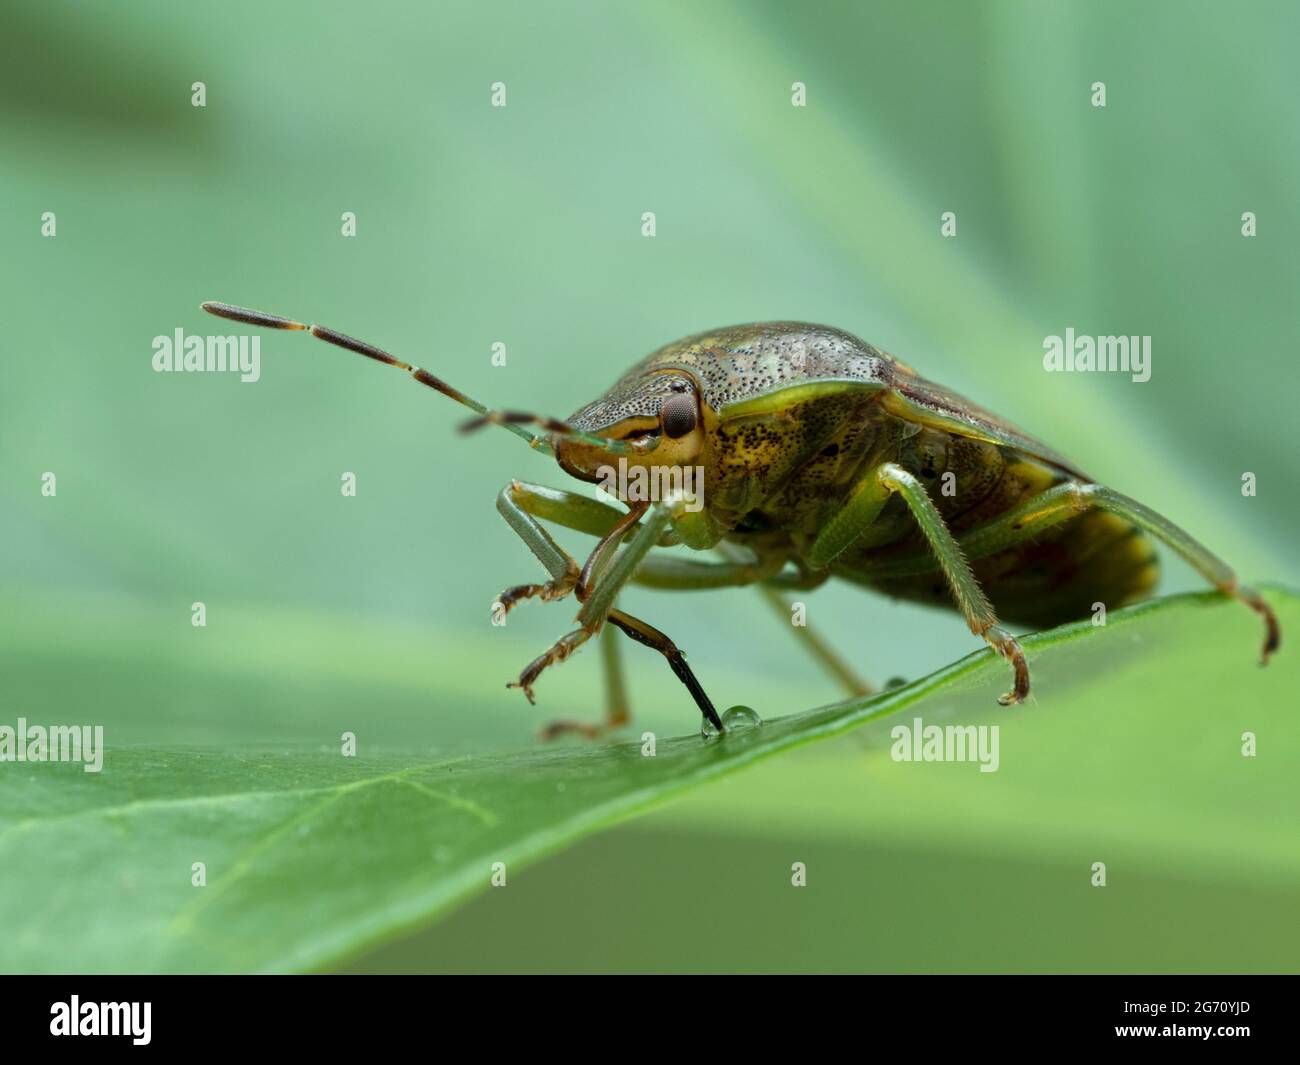 close-up of a green burgundy stink bug, Banasa dimidiata, drinking from a drop with its long articulated proboscis Stock Photo